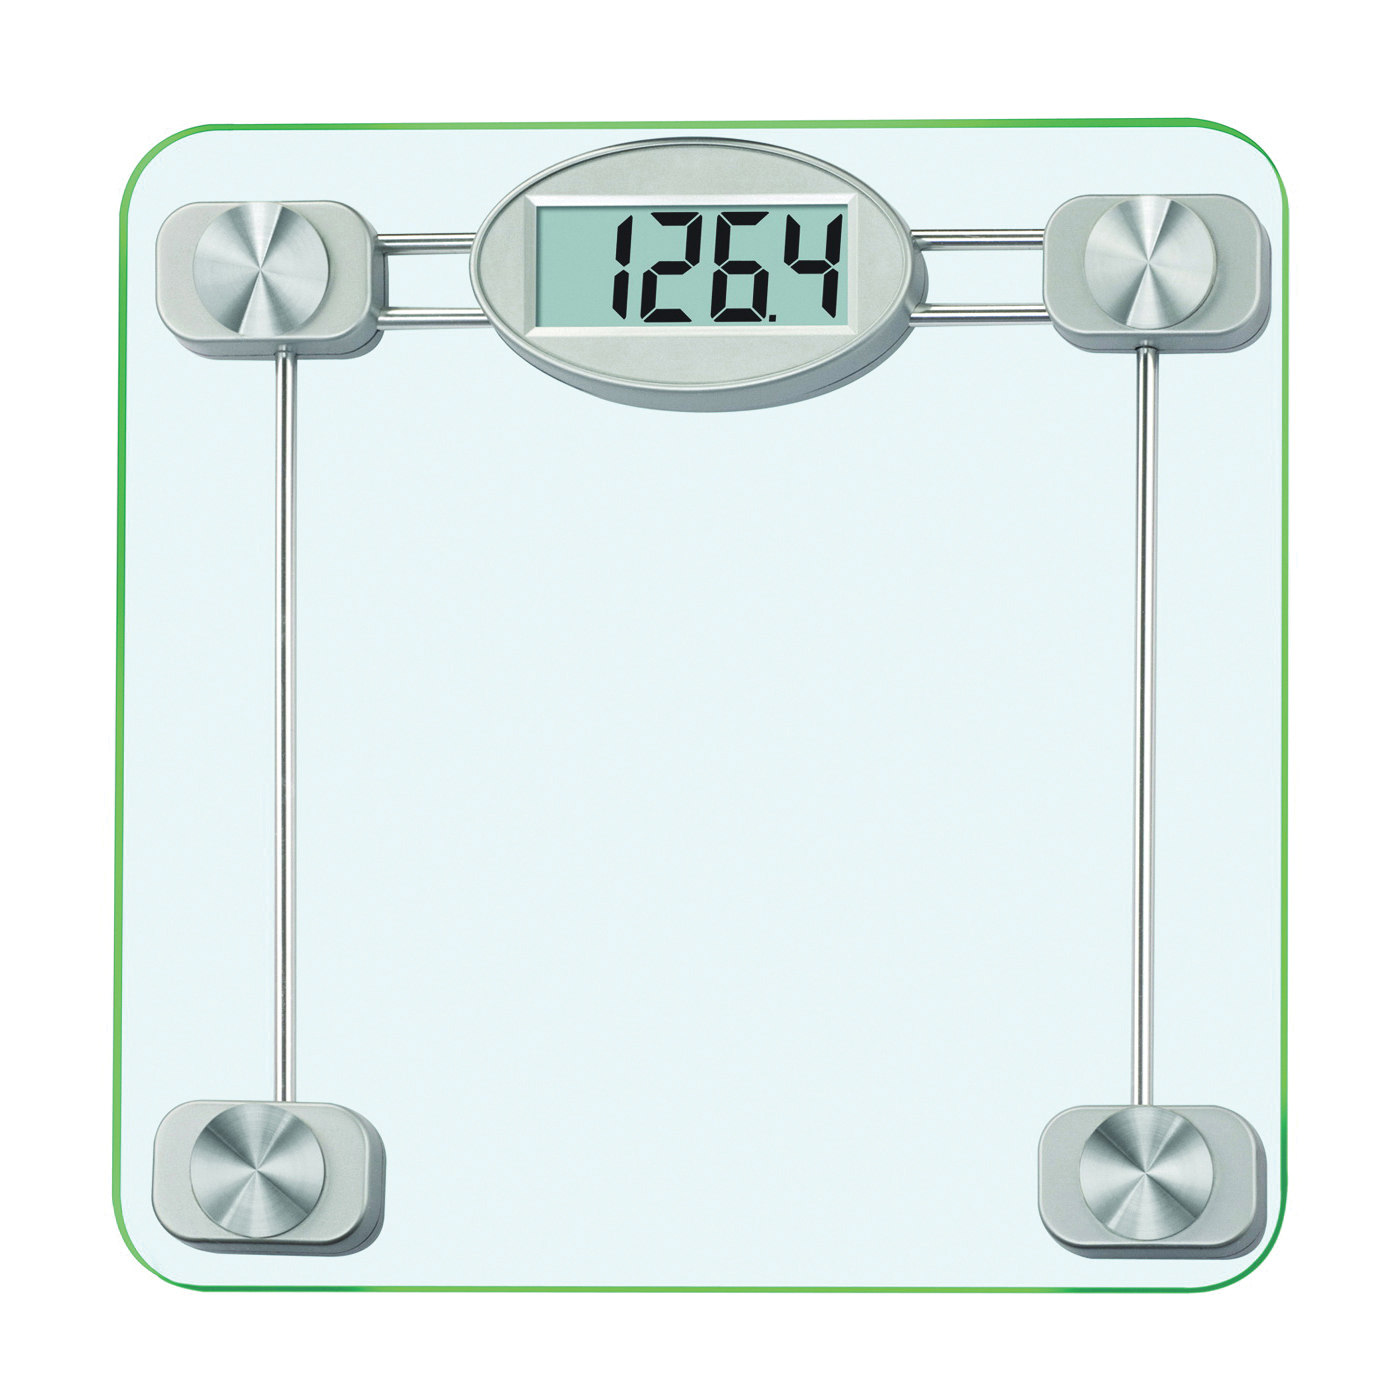 75274192 Bathroom Scale, 400 lb Capacity, LCD Display, Metal Housing Material, Clear, 13.38 in OAW, 13.41 in OAD